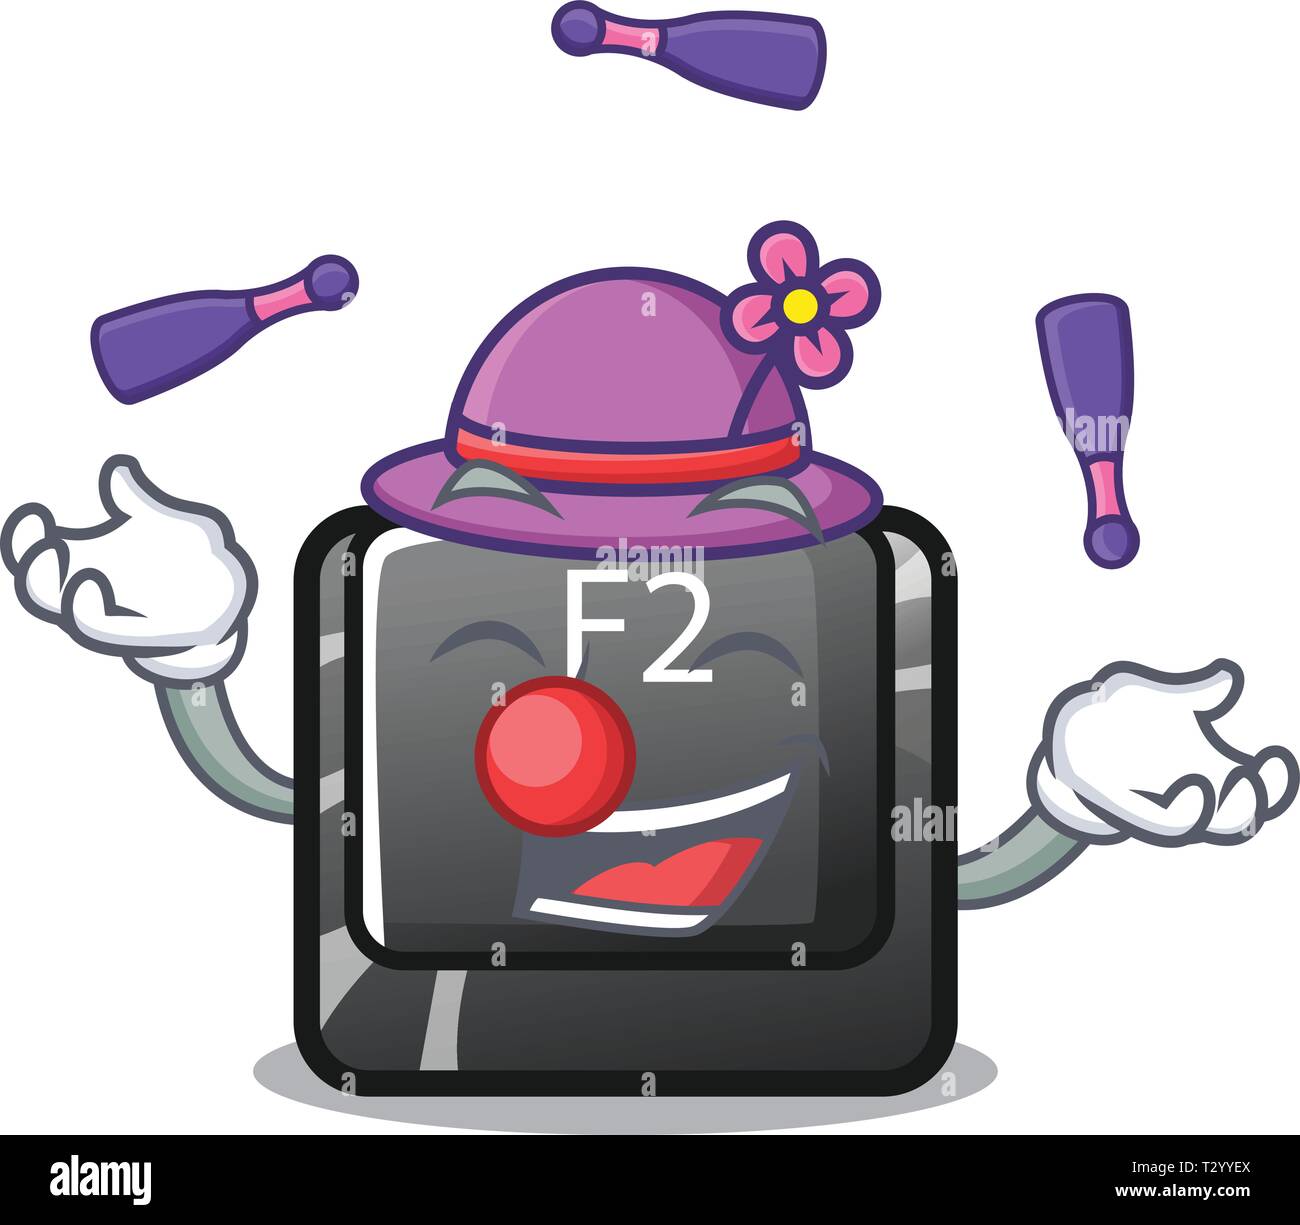 Juggling f2 button on the mascot computervector illustration Stock Vector